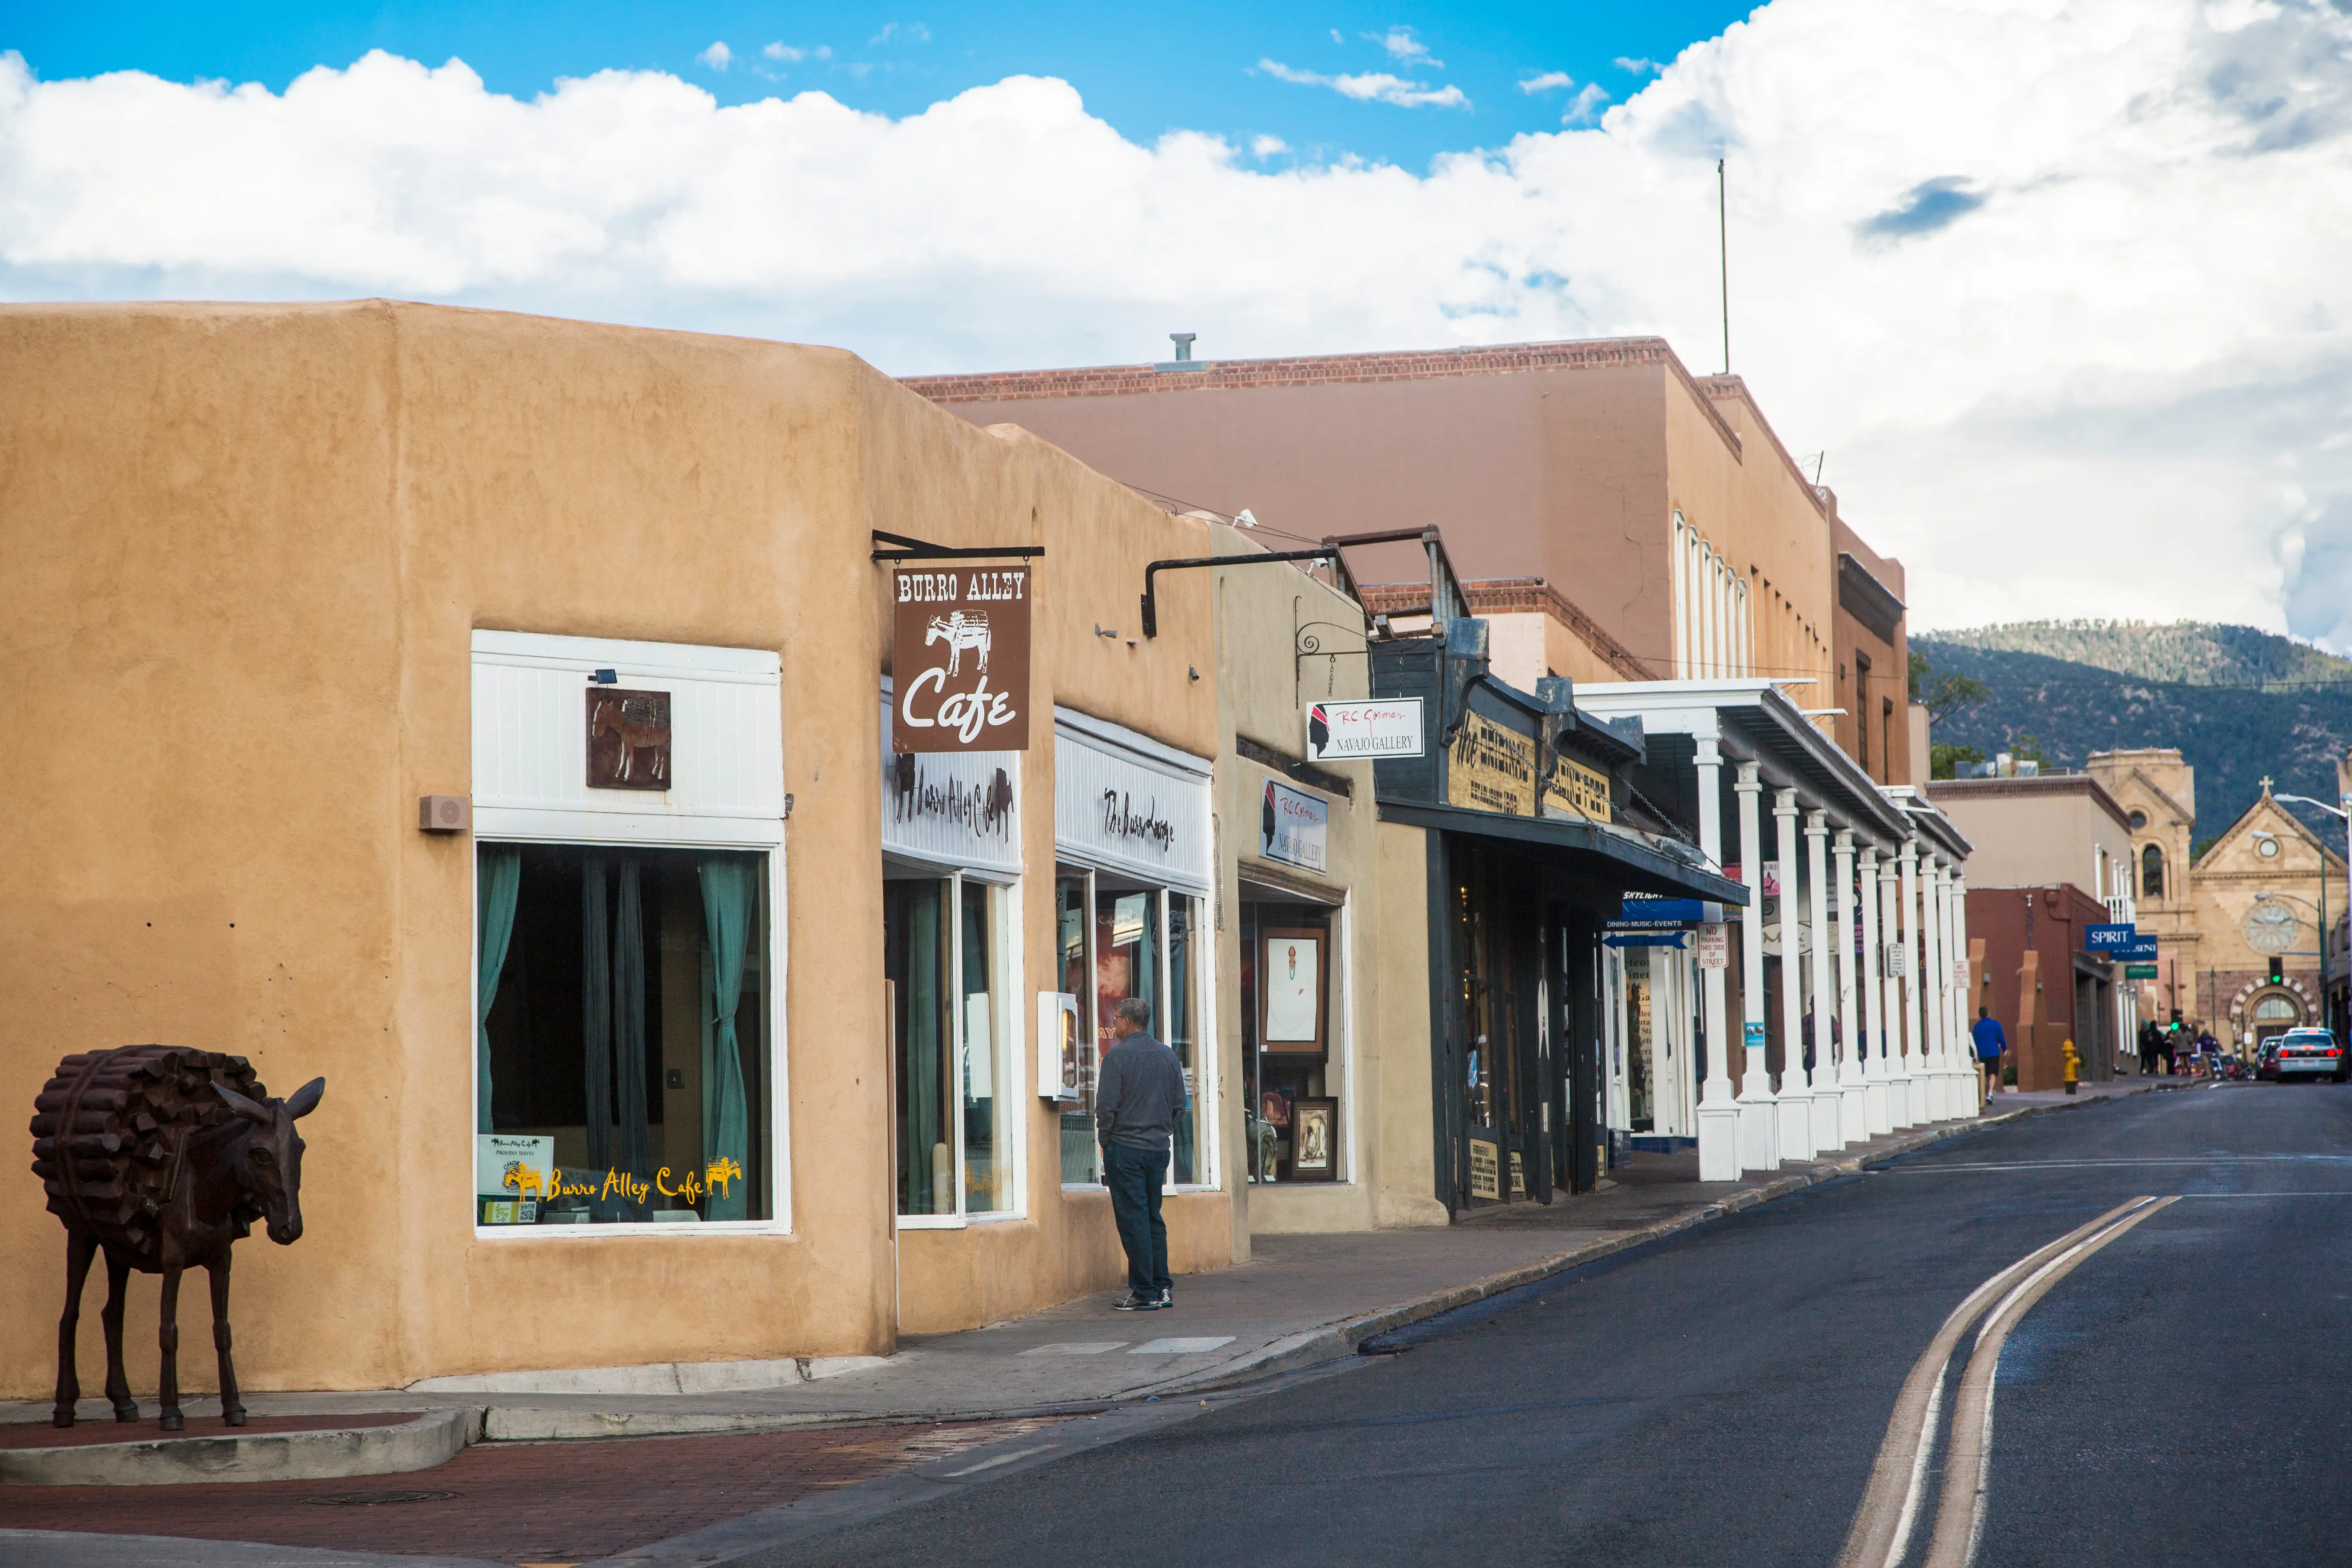 Sante Fe, New Mexico. Living in Santa Fe, which was built by Spanish colonists in 1610, is a bit like living in a museum, thanks to the pueblo-style architecture and Museum Hill, home to the city's substantial  art collections.